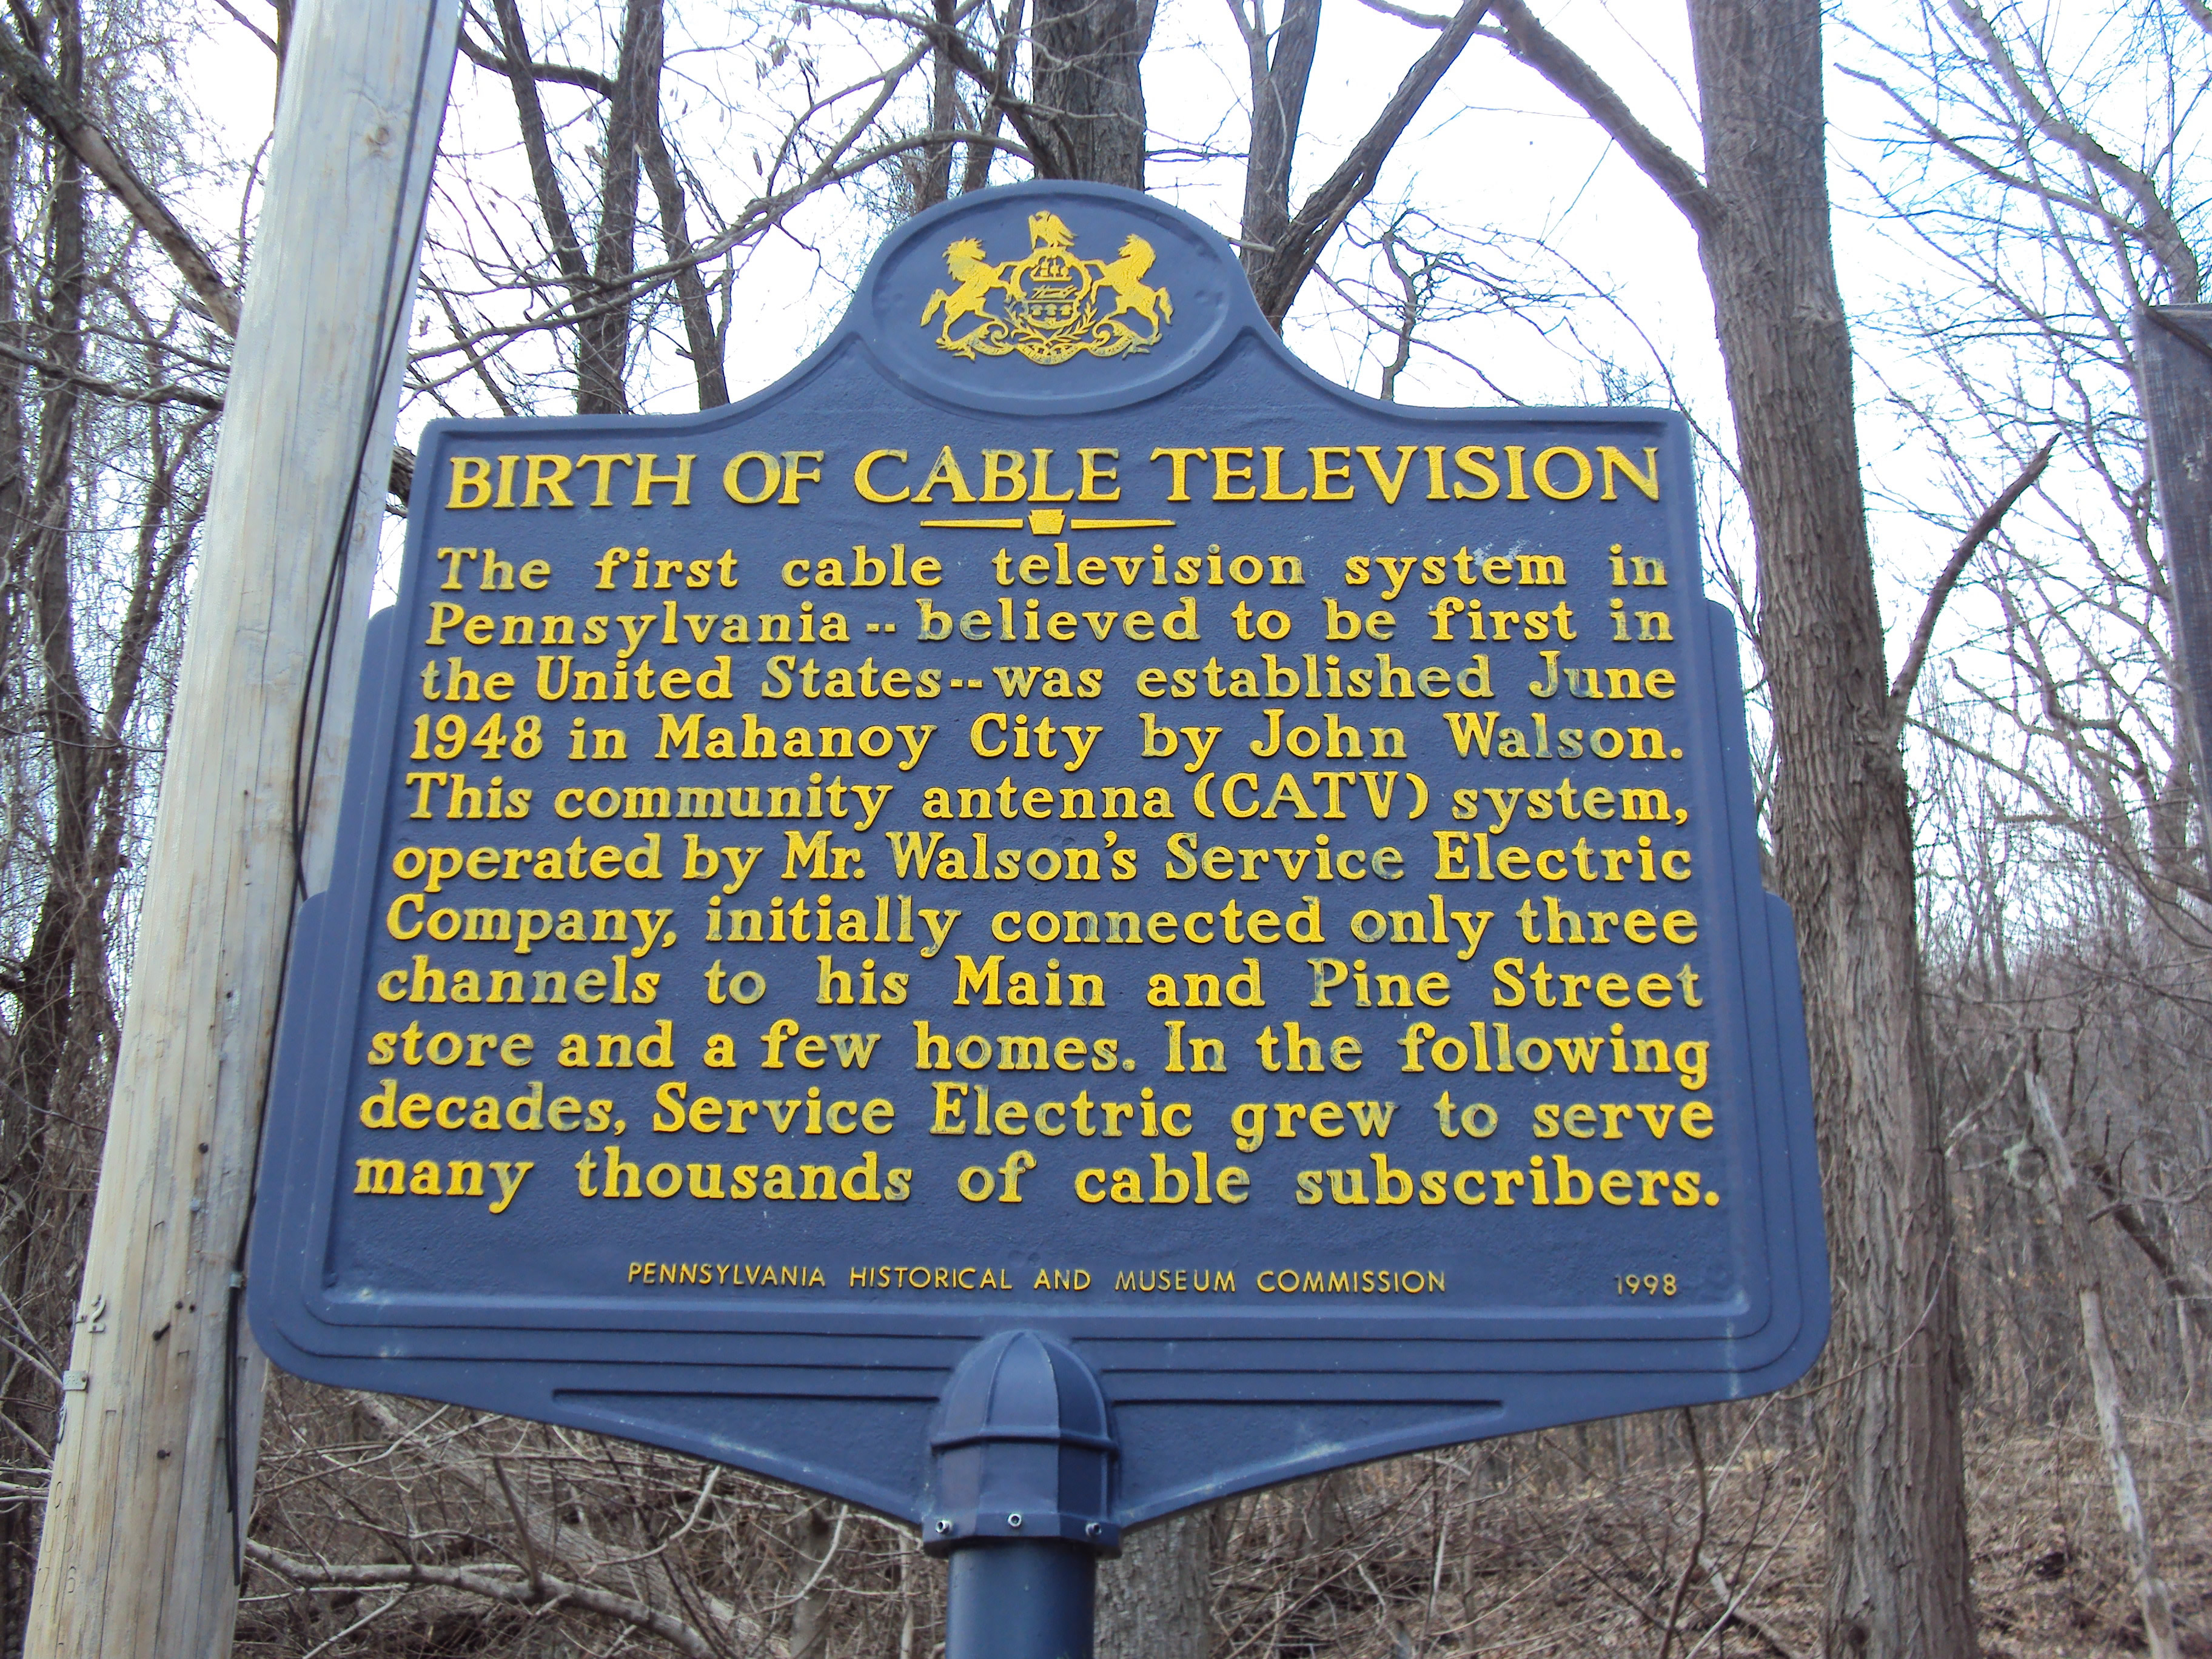 State historical marker for cable television